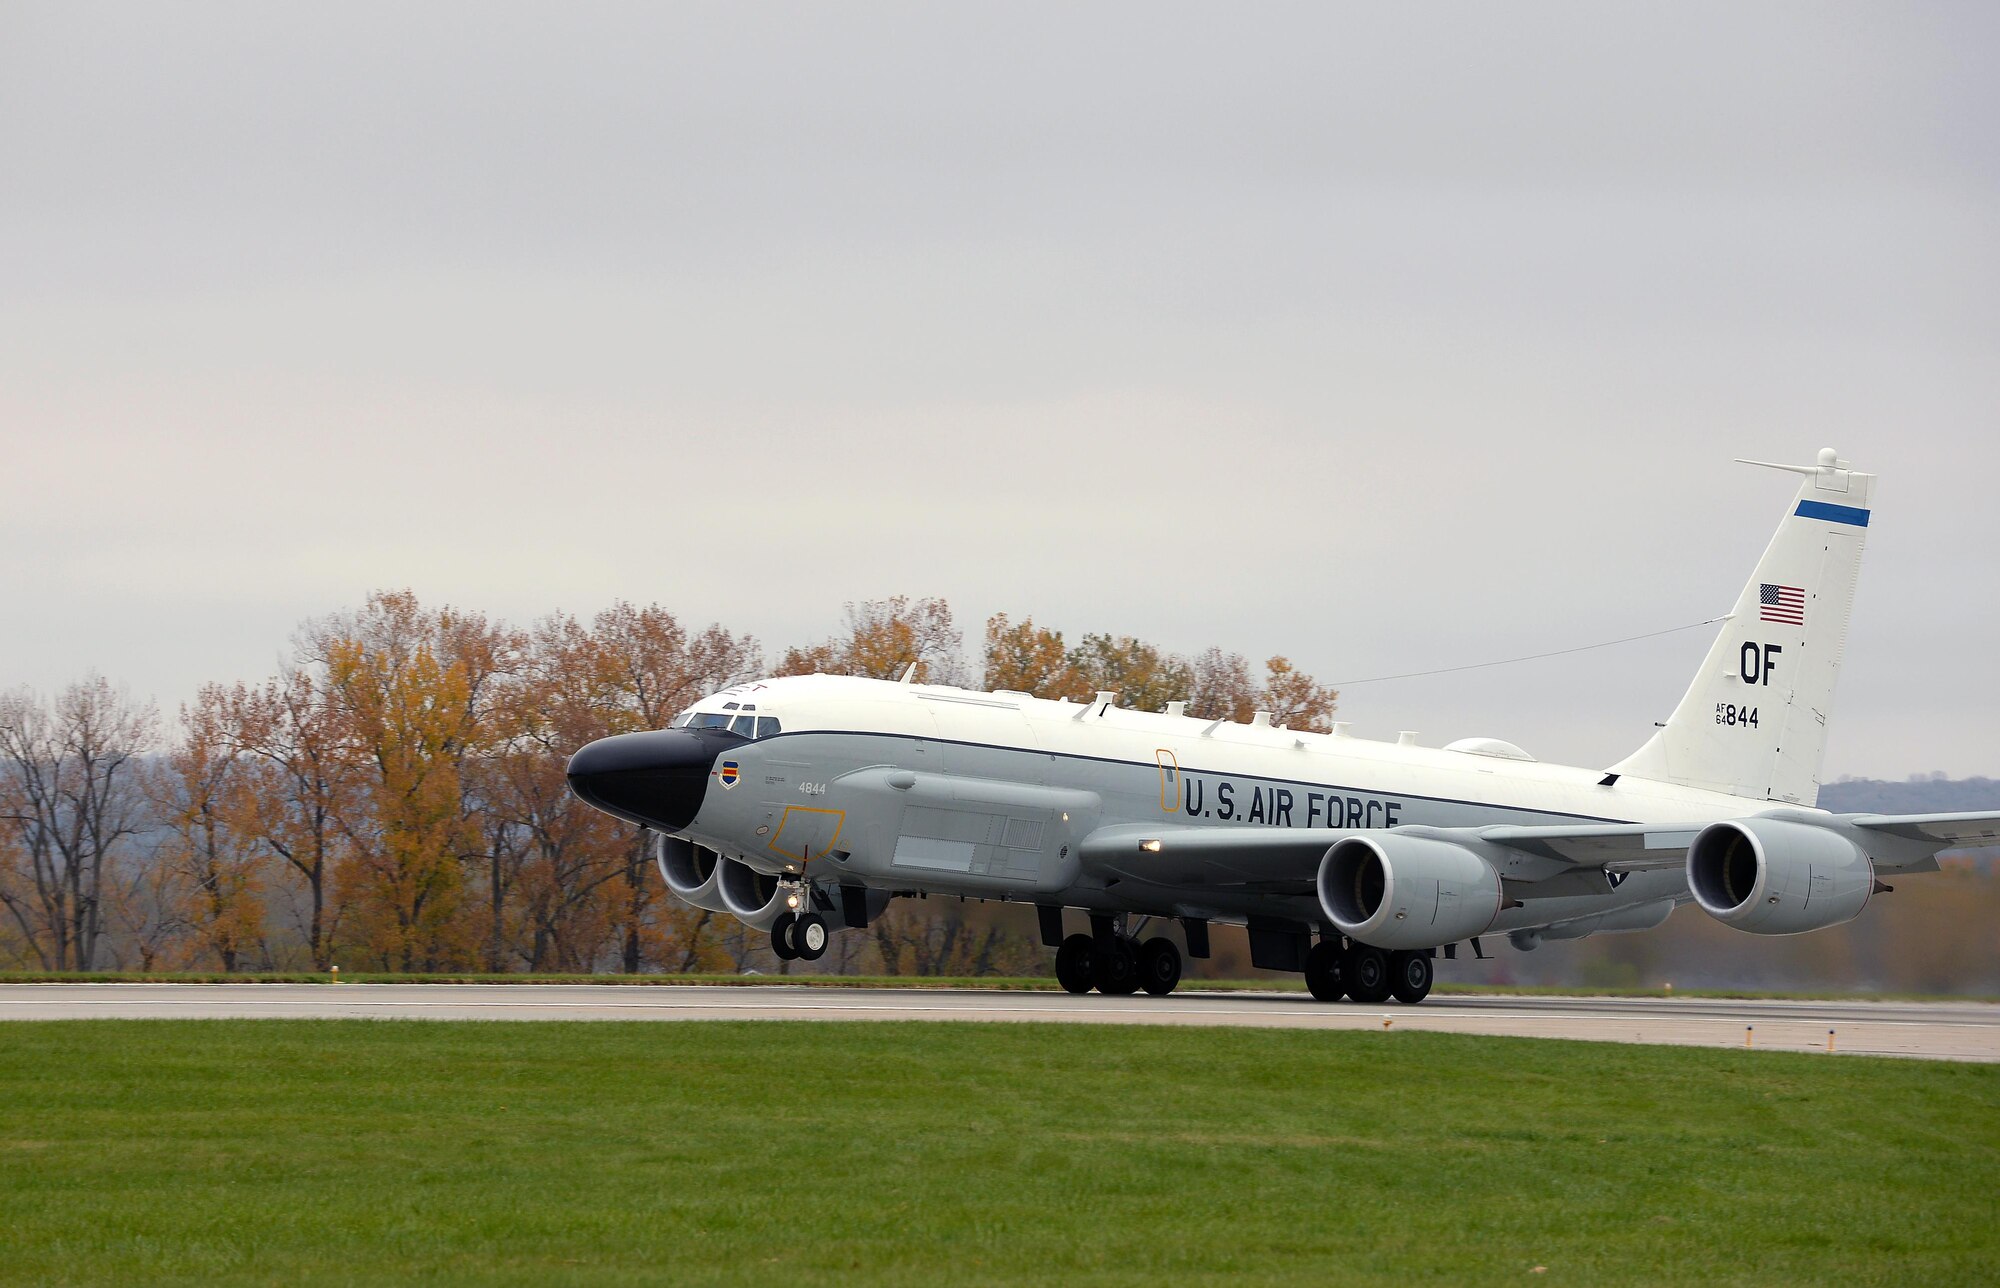 An Offutt-based RC-135 V/W Rivet Joint aircraft takes-off during Global Thunder 17, U.S. Strategic Command’s annual command post and field training exercise, Oct. 30, 2016, at Offutt Air Force Base, Neb. The exercise provided training opportunities for USSTRATCOM-tasked components, task forces, units and command posts to deter and, if necessary, defeat a military attack against the United States and to employ forces as directed by the President. (U.S. Air Force Photo by Delanie Stafford)